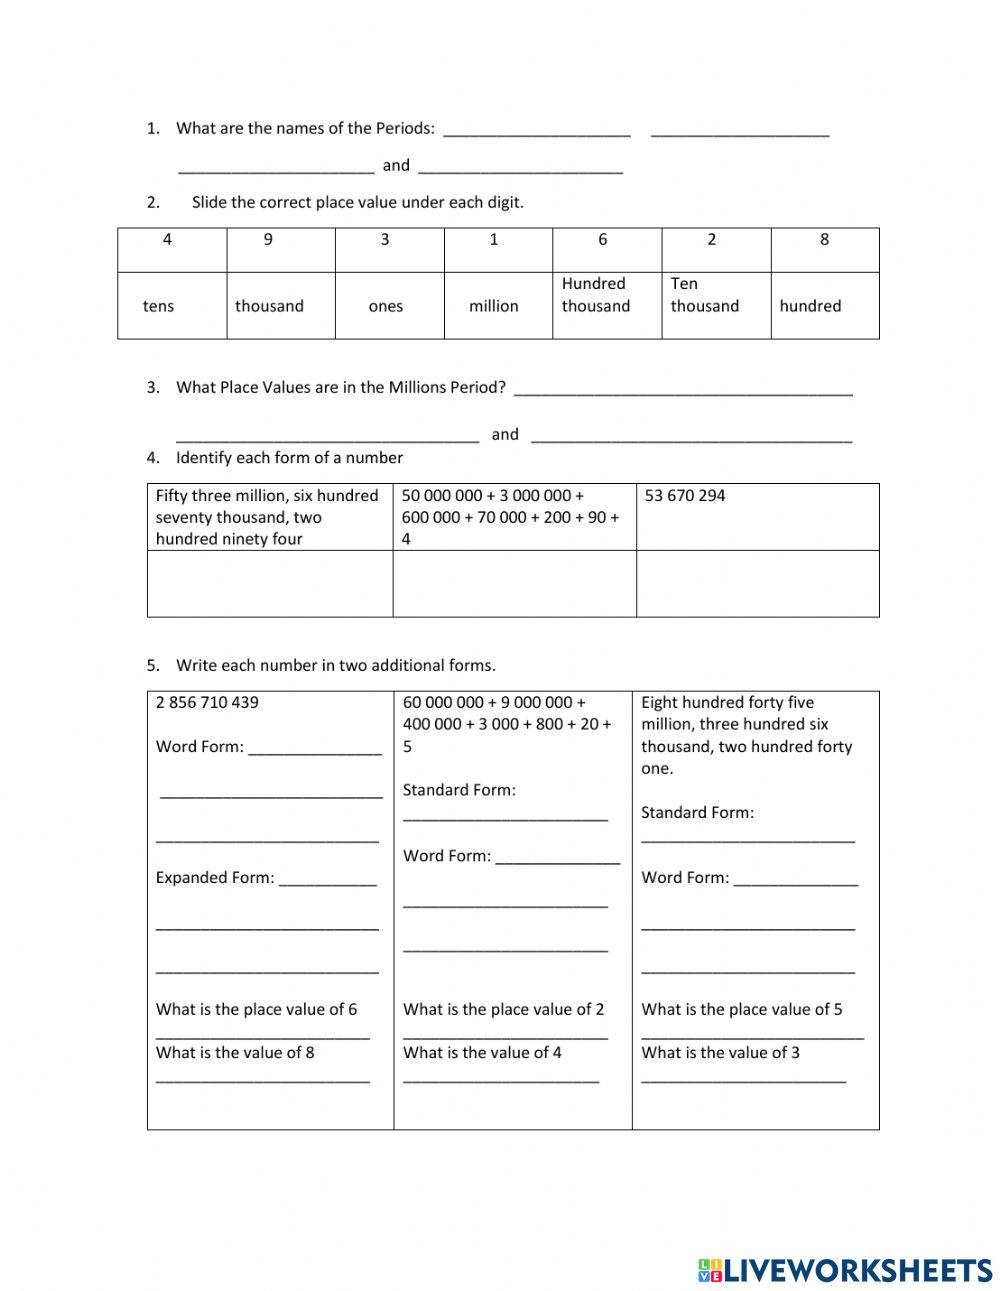 Place Value Standard Expanded Word Form Test